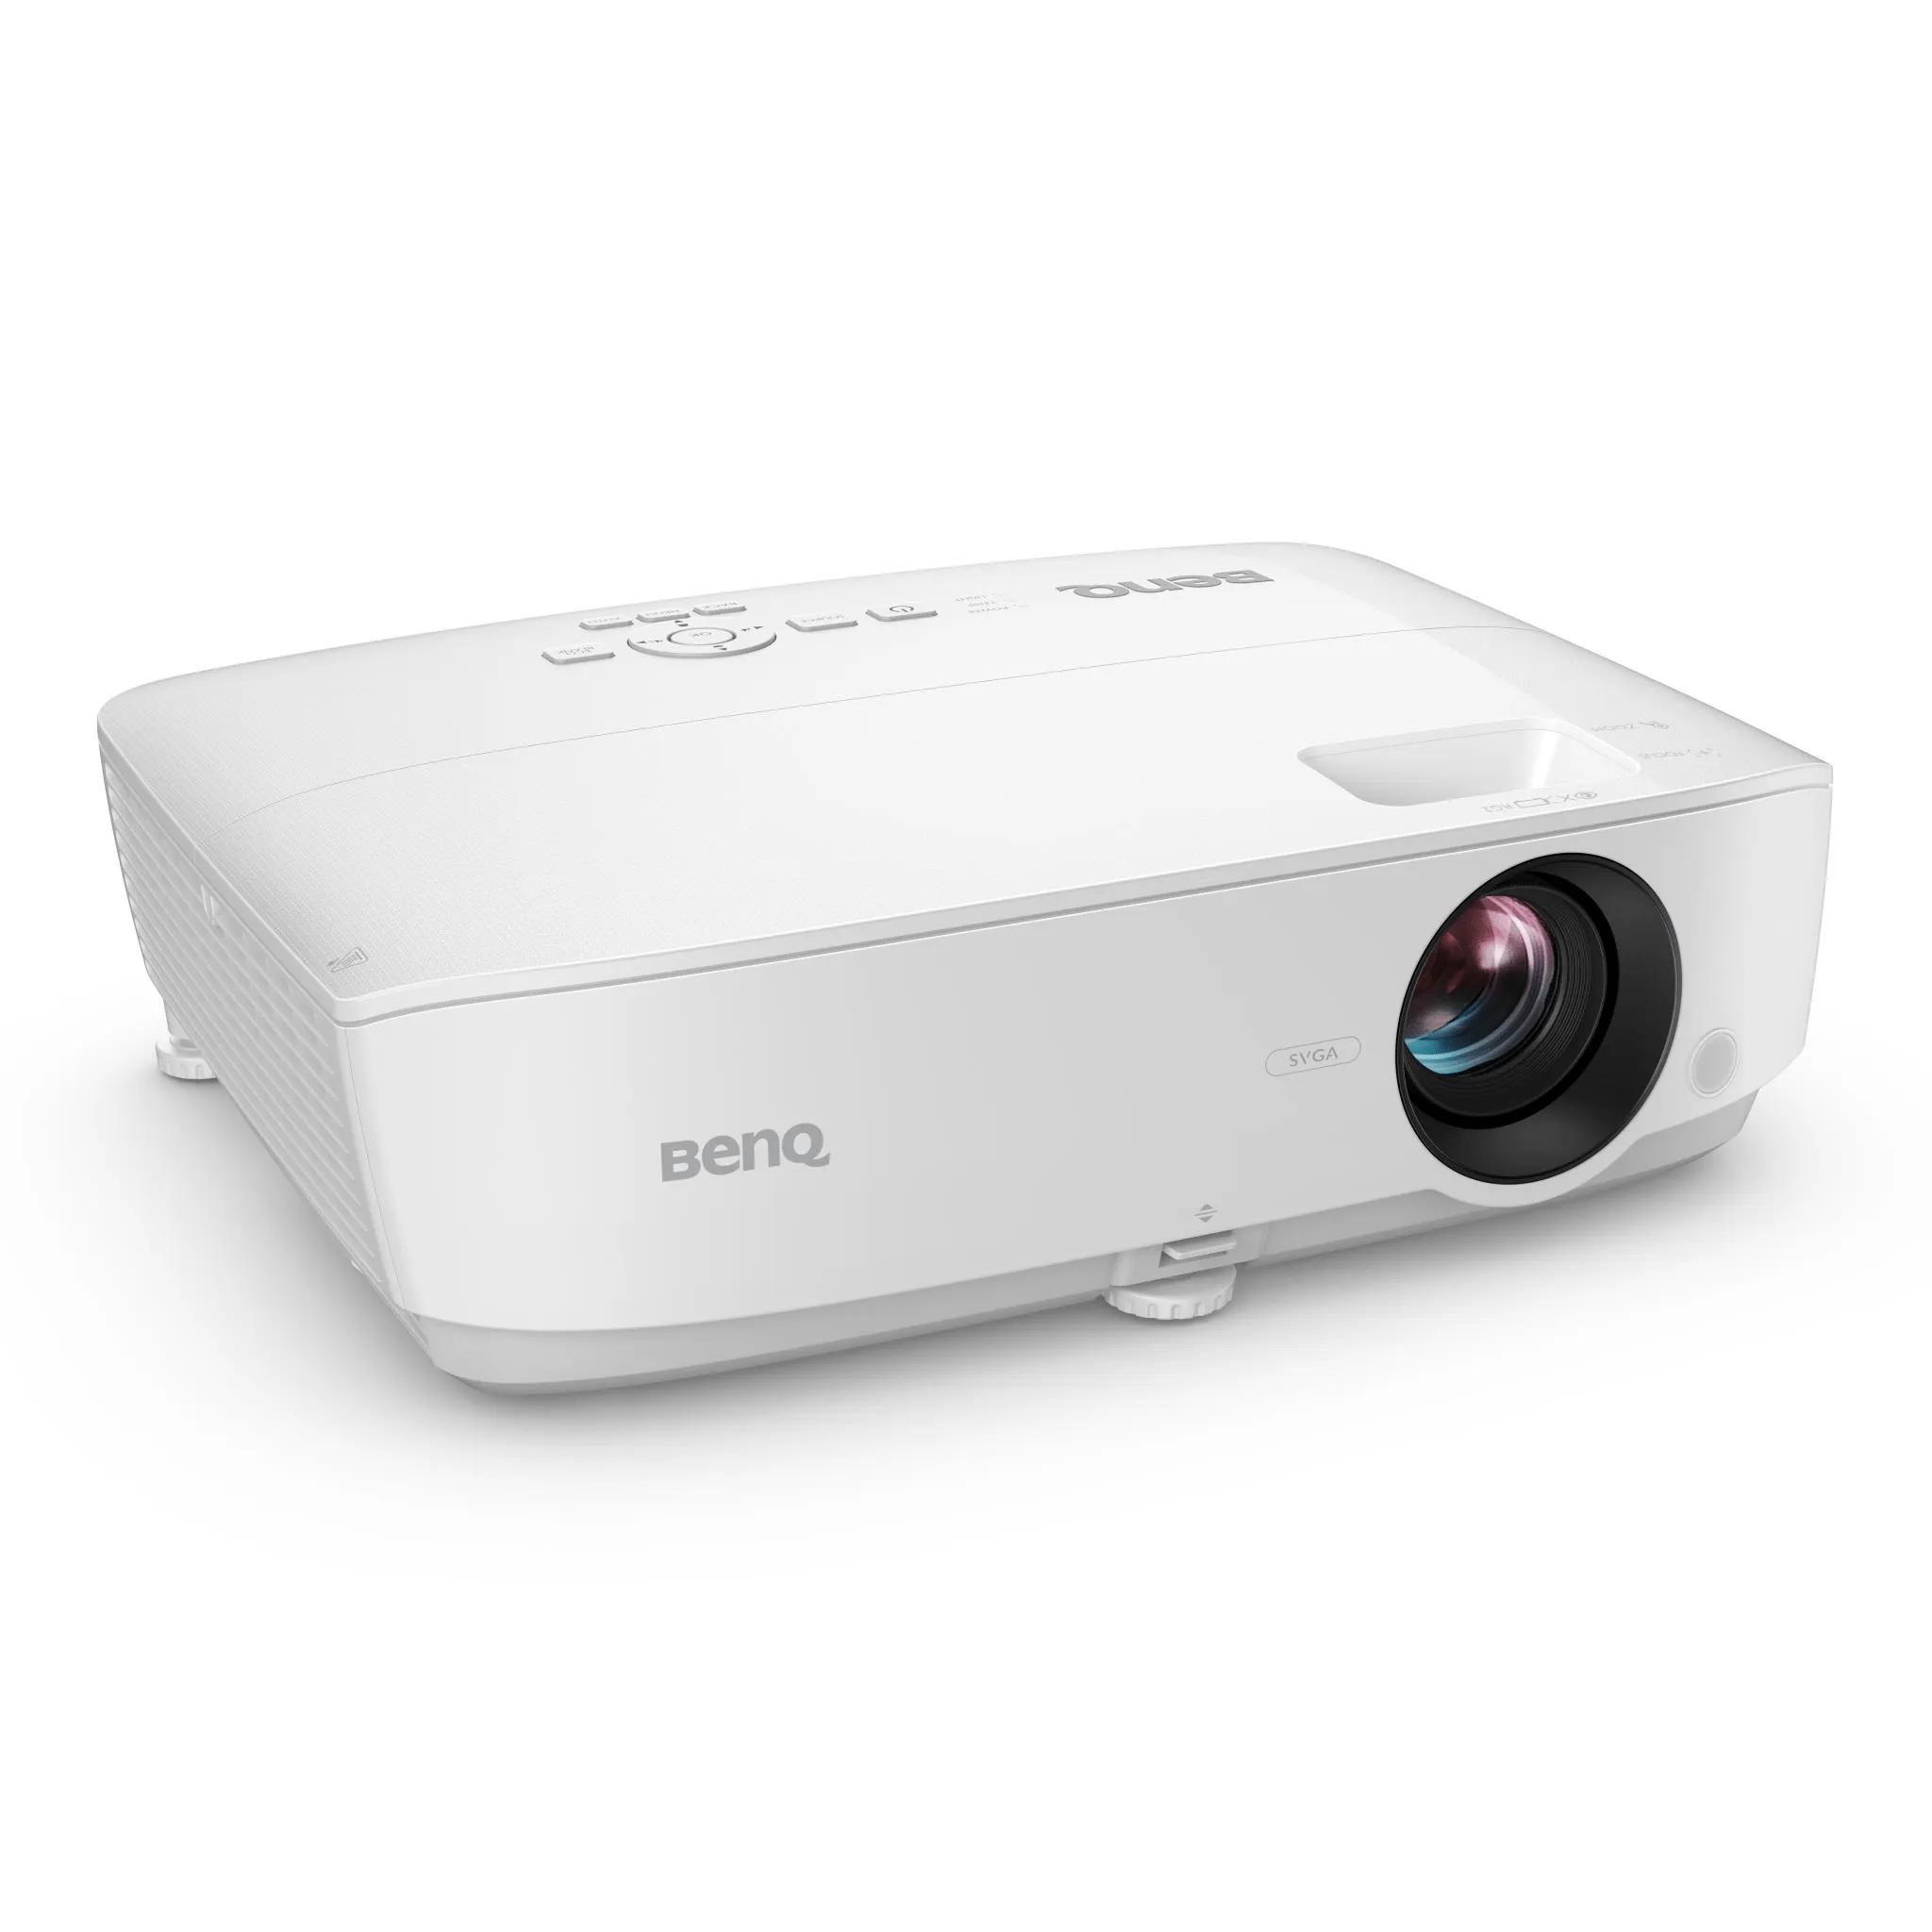 BenQ MS536 SVGA Business Projector with All Glass Lenses for Presentations